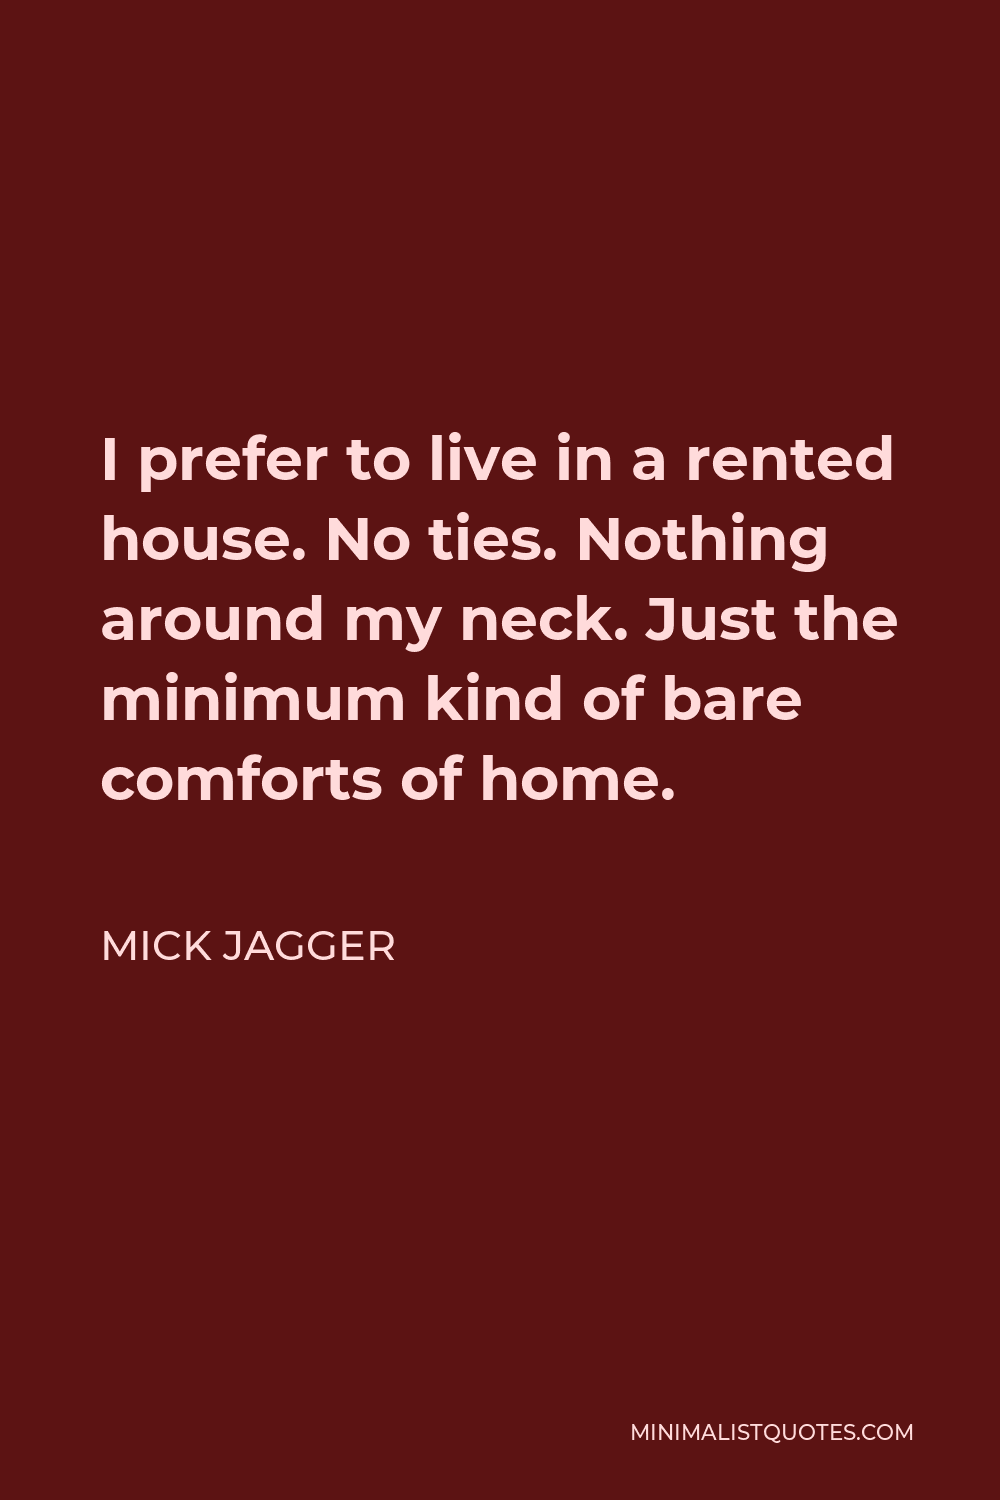 Mick Jagger Quote - I prefer to live in a rented house. No ties. Nothing around my neck. Just the minimum kind of bare comforts of home.